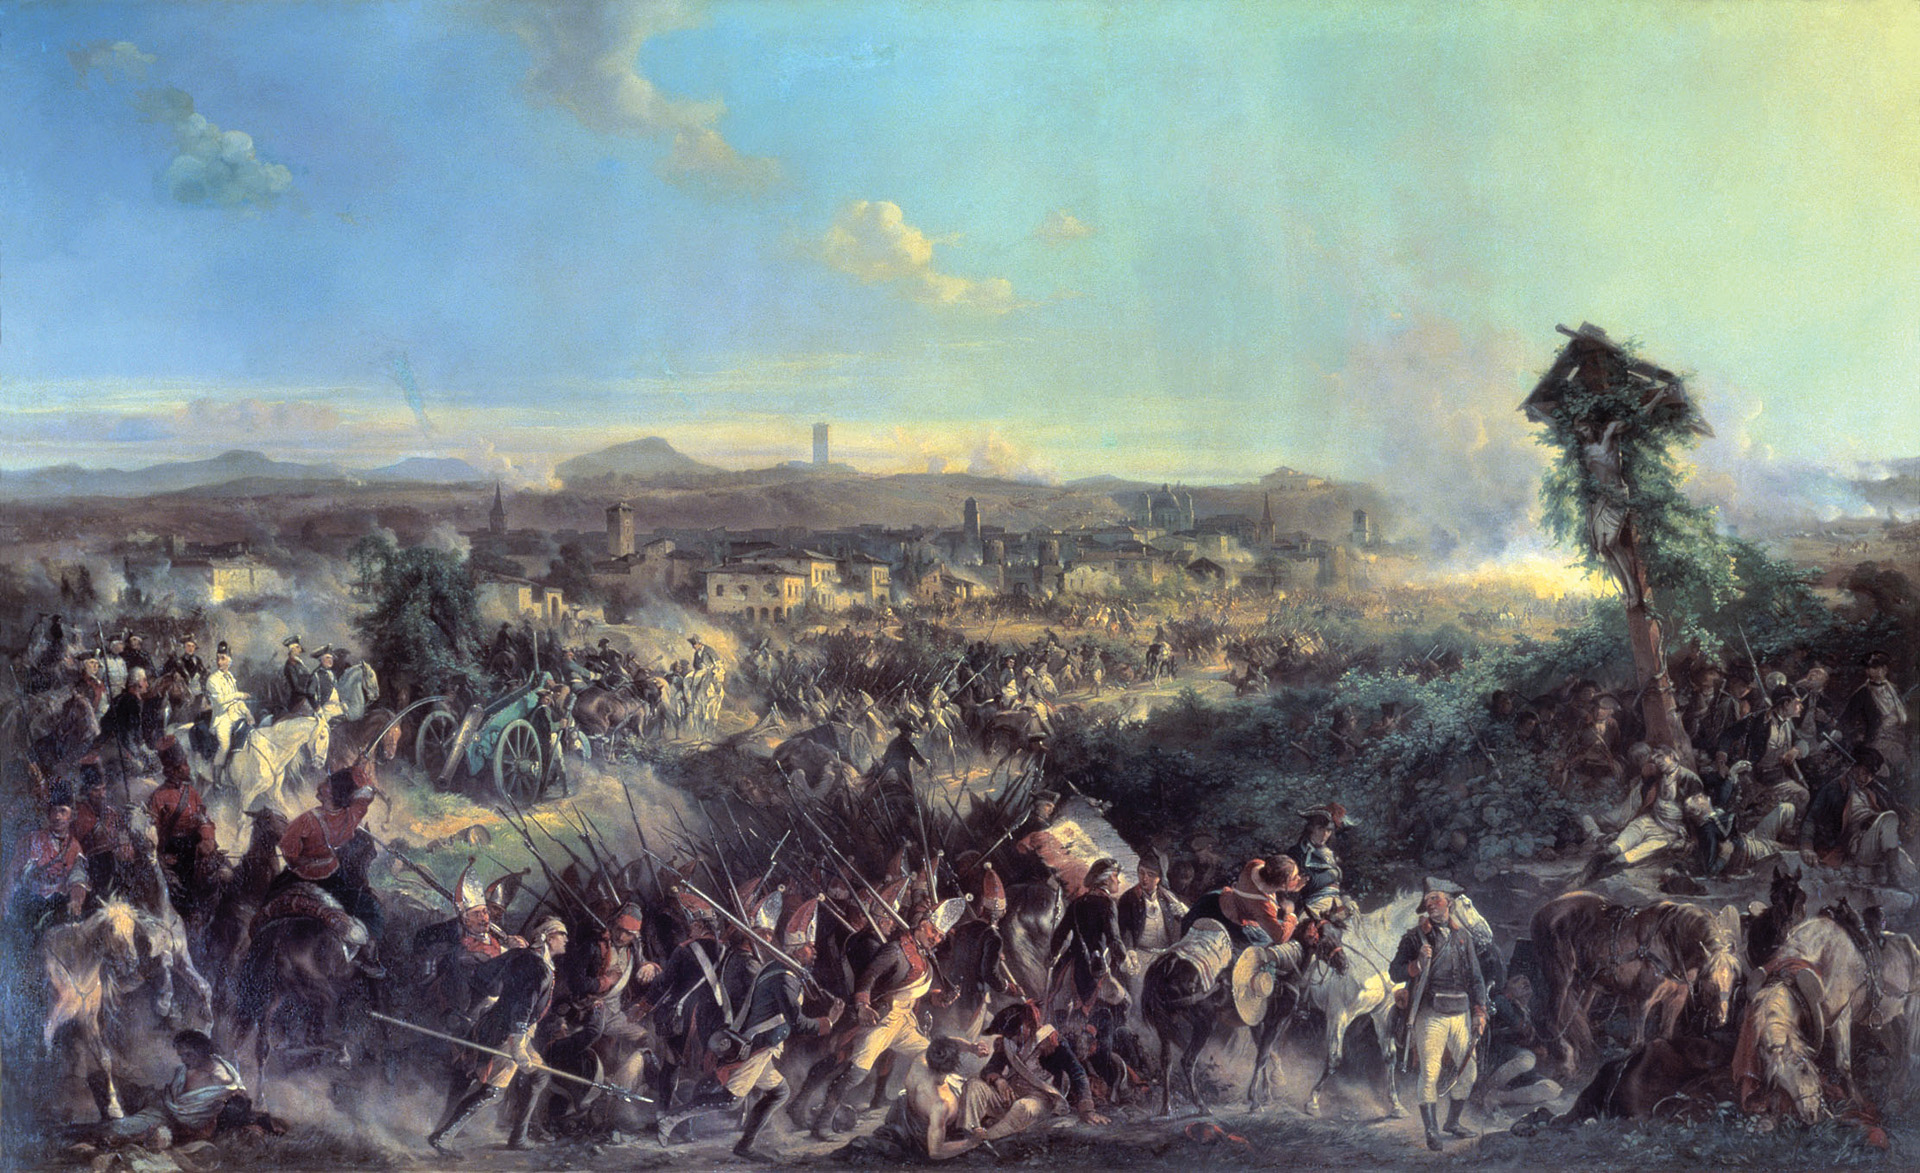 Mikhail Suvorov leads an army to victory against the French at Novi in 1799. In the series of decisive battles against revolutionary France, Suvorov defeated every French army sent against him, completely clearing northern Italy of enemy forces.